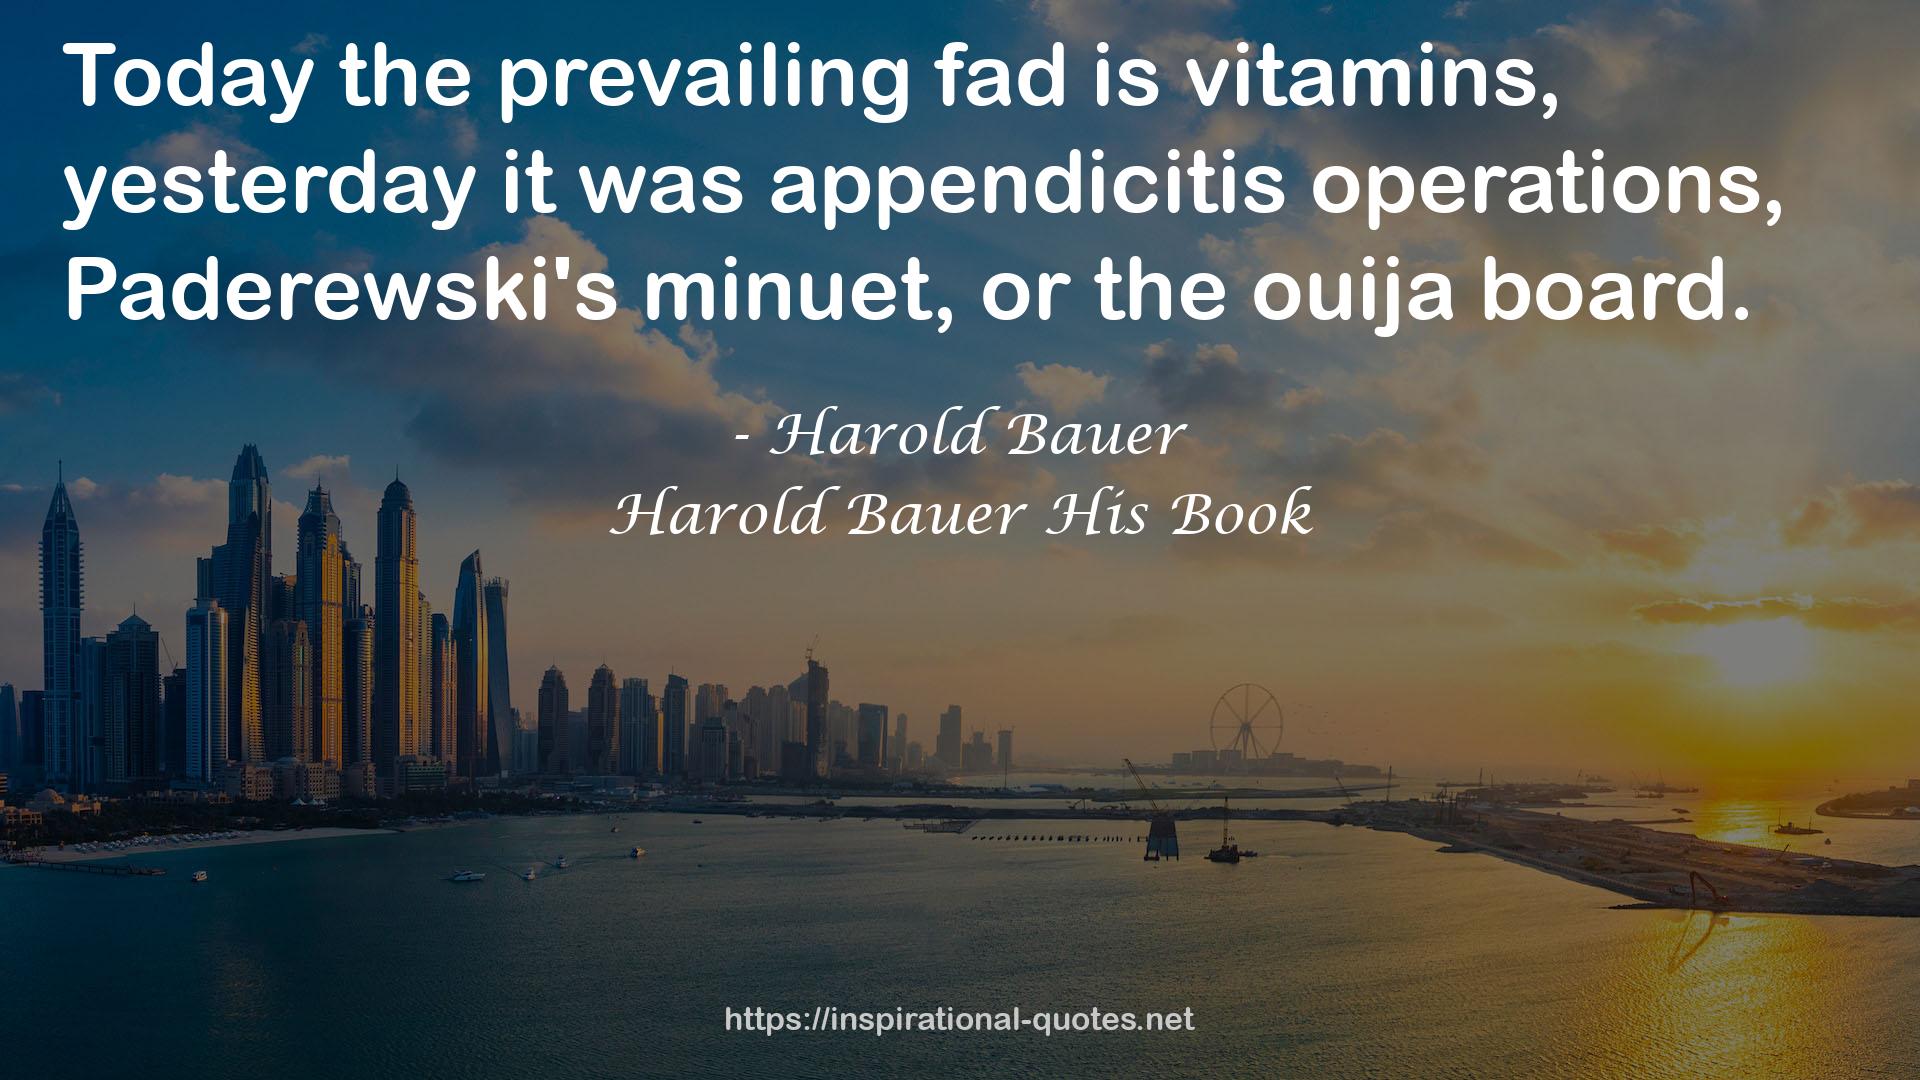 Harold Bauer His Book QUOTES